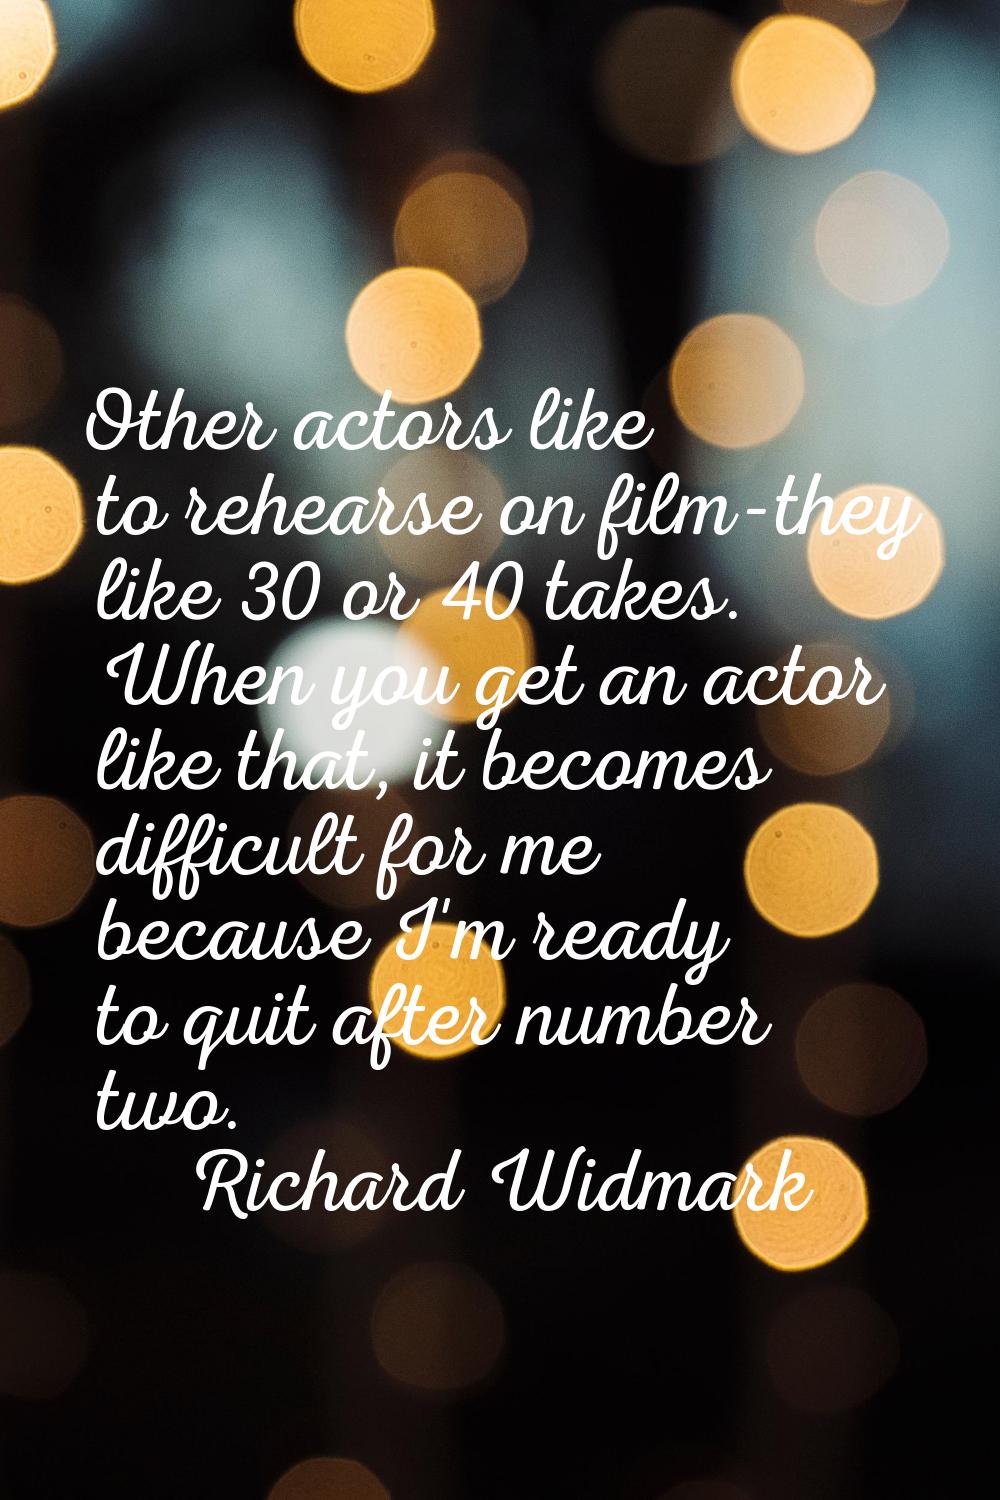 Other actors like to rehearse on film-they like 30 or 40 takes. When you get an actor like that, it